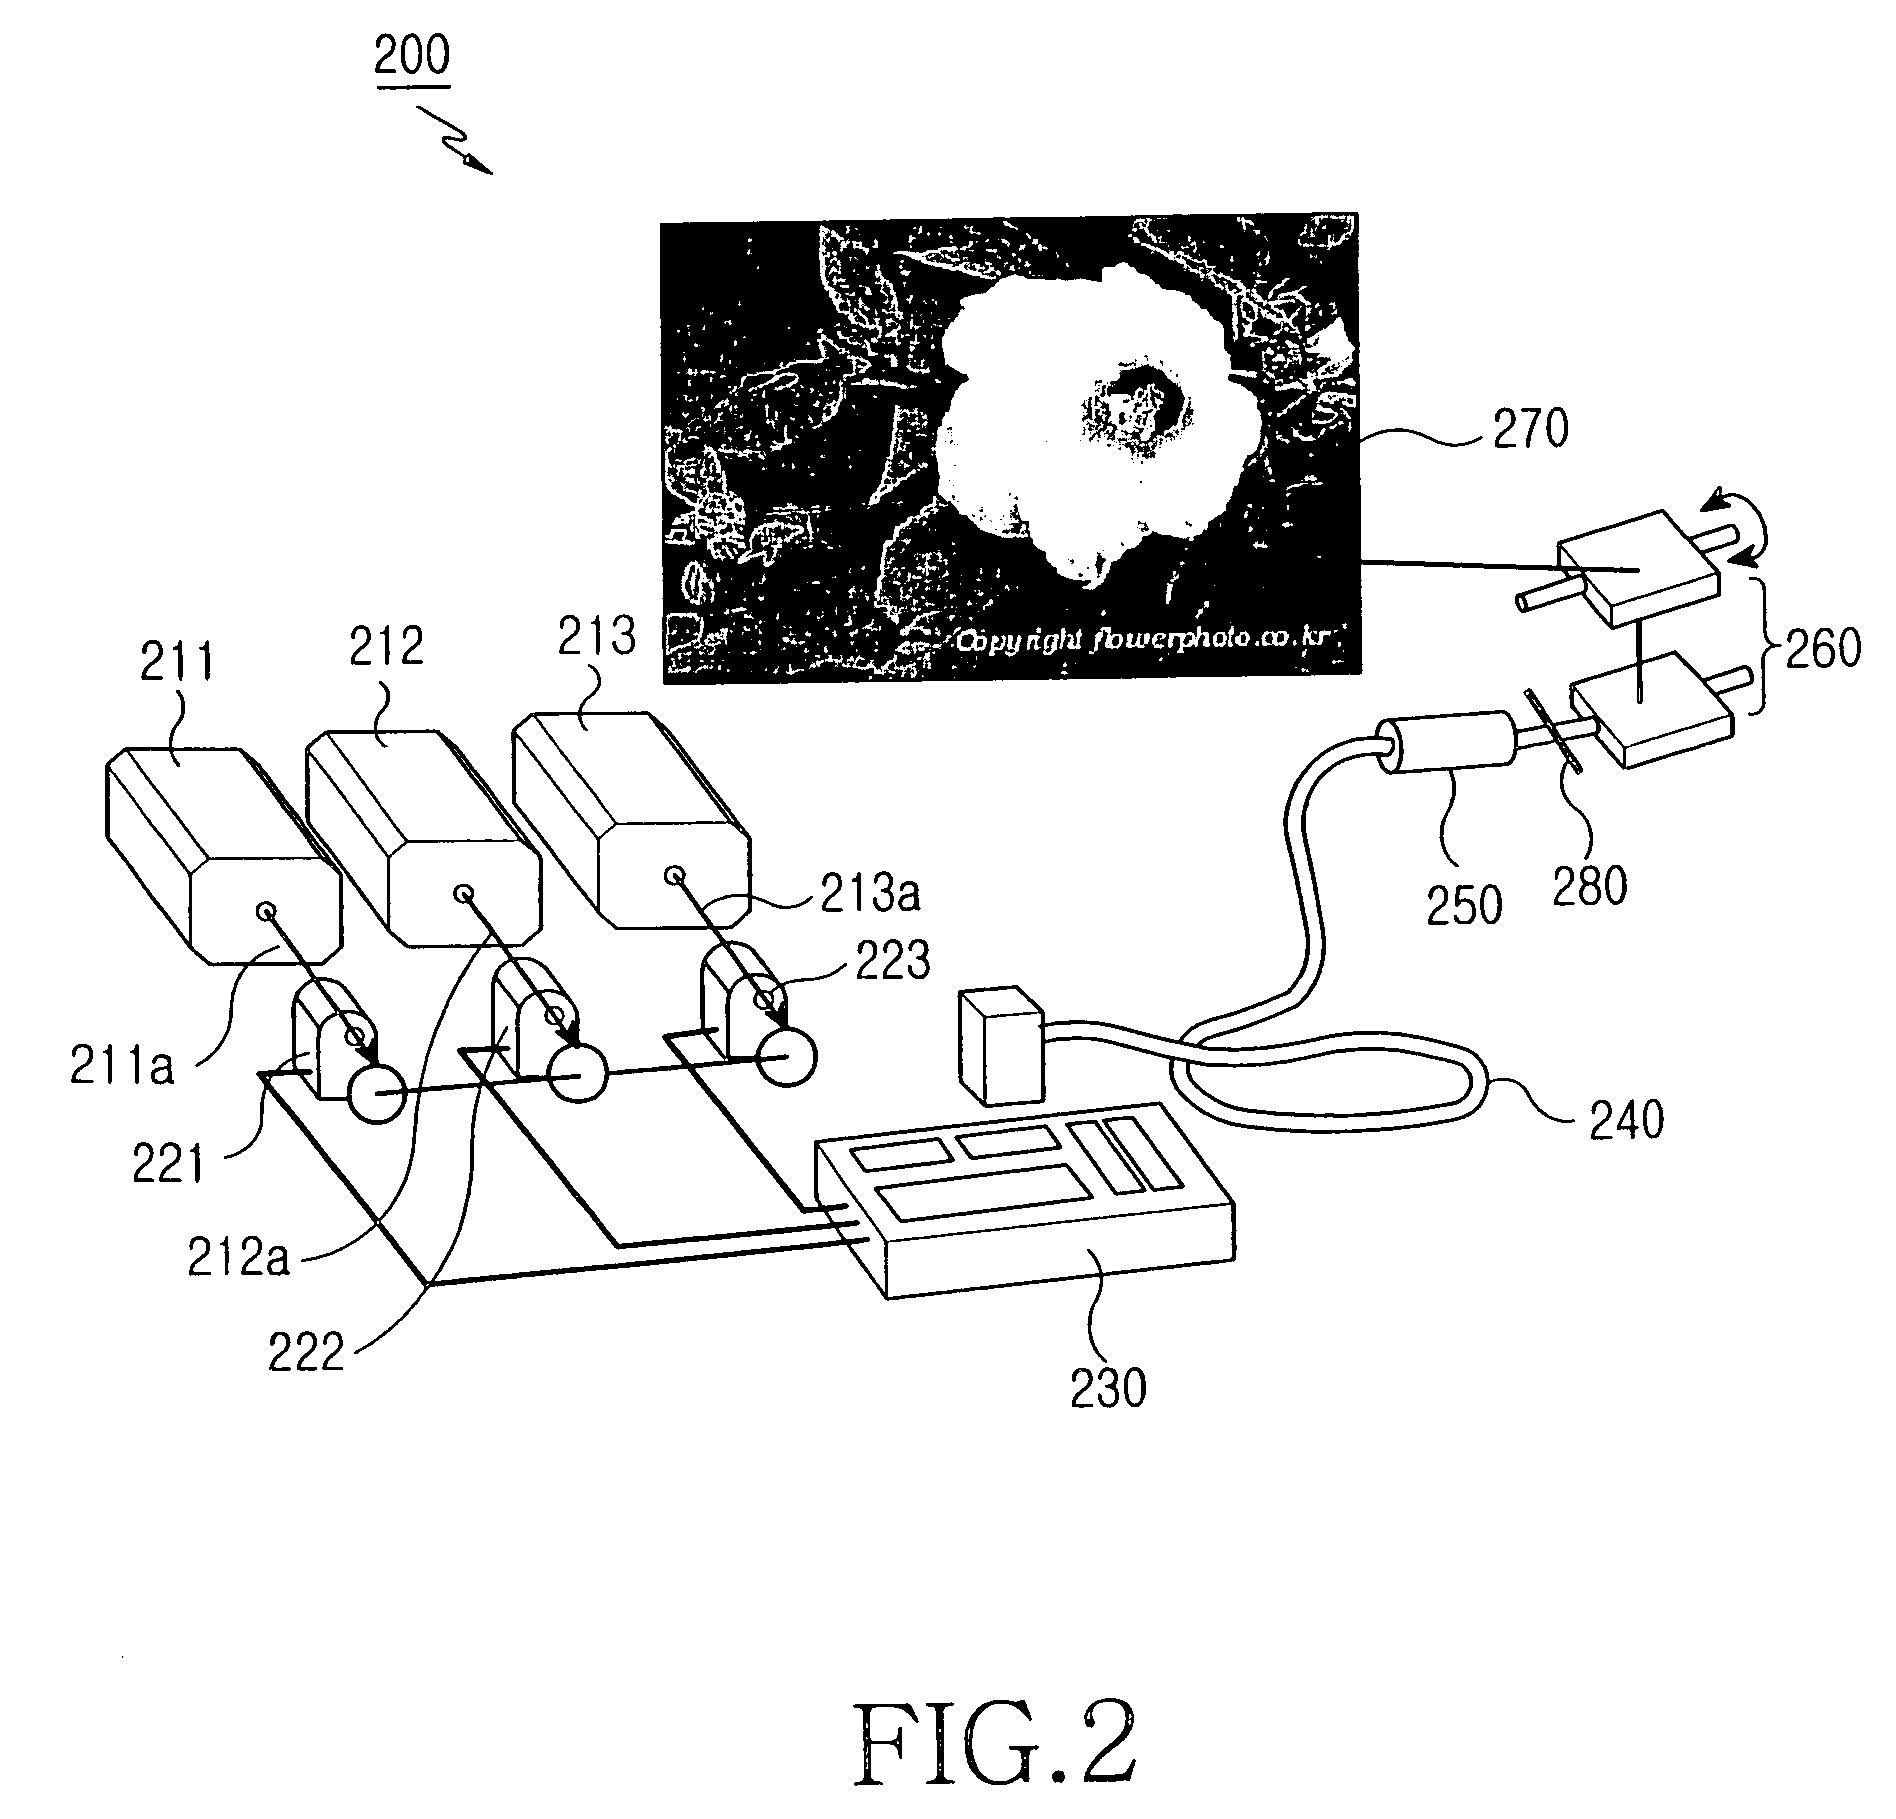 Diffraction grating and laser television using the same